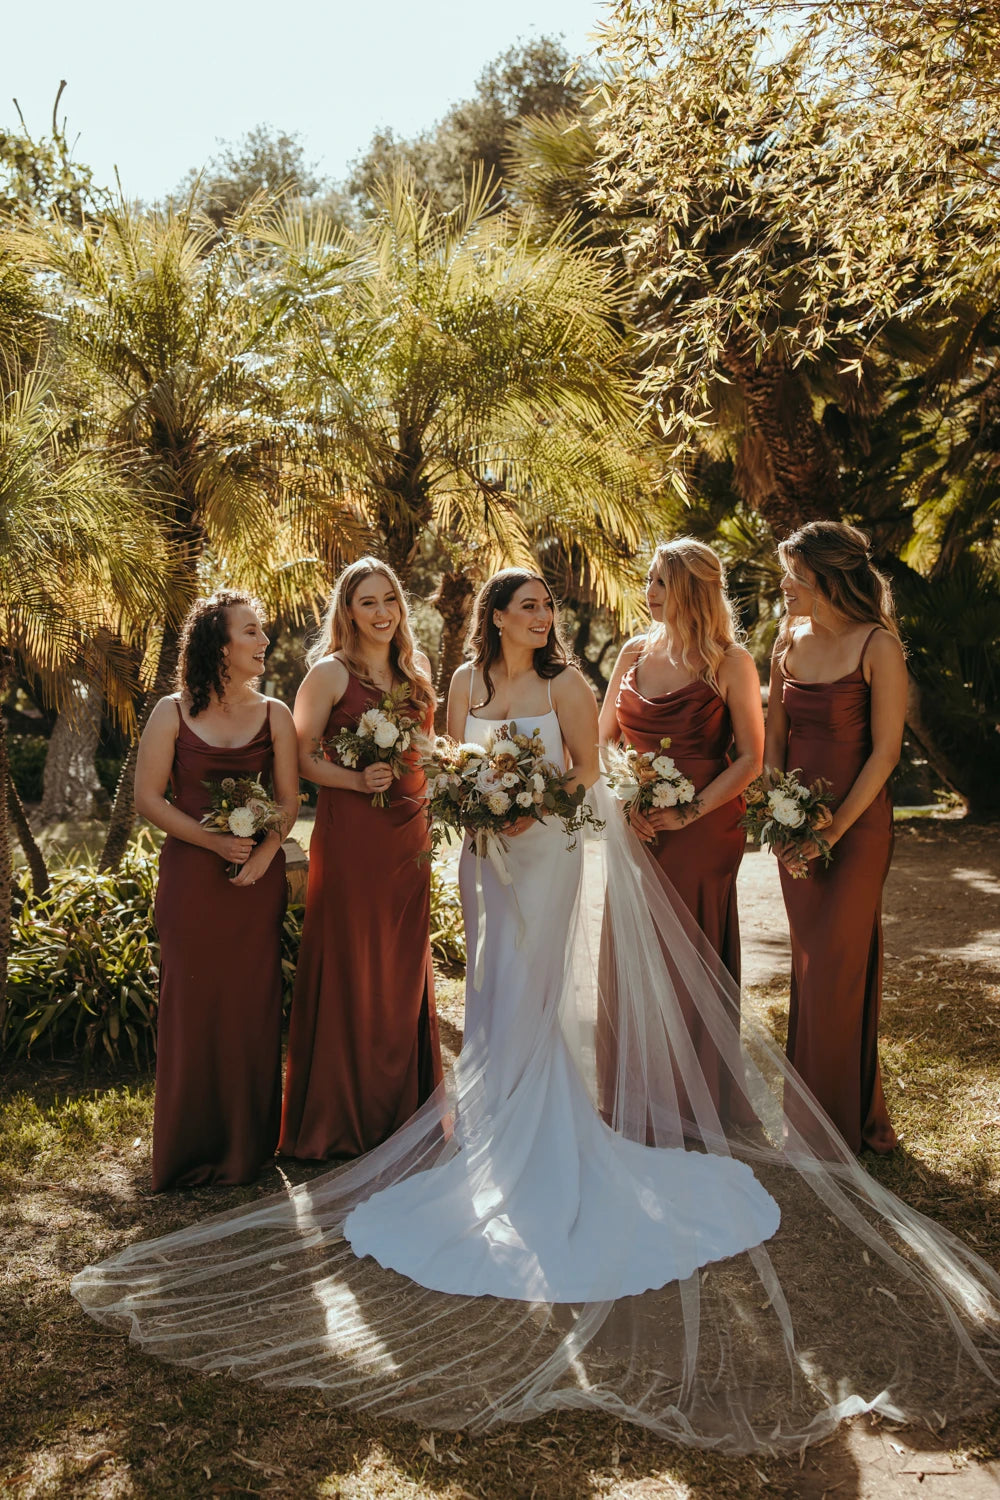 Bride wearing cathedral wedding veil. Group photo with bridesmaids.